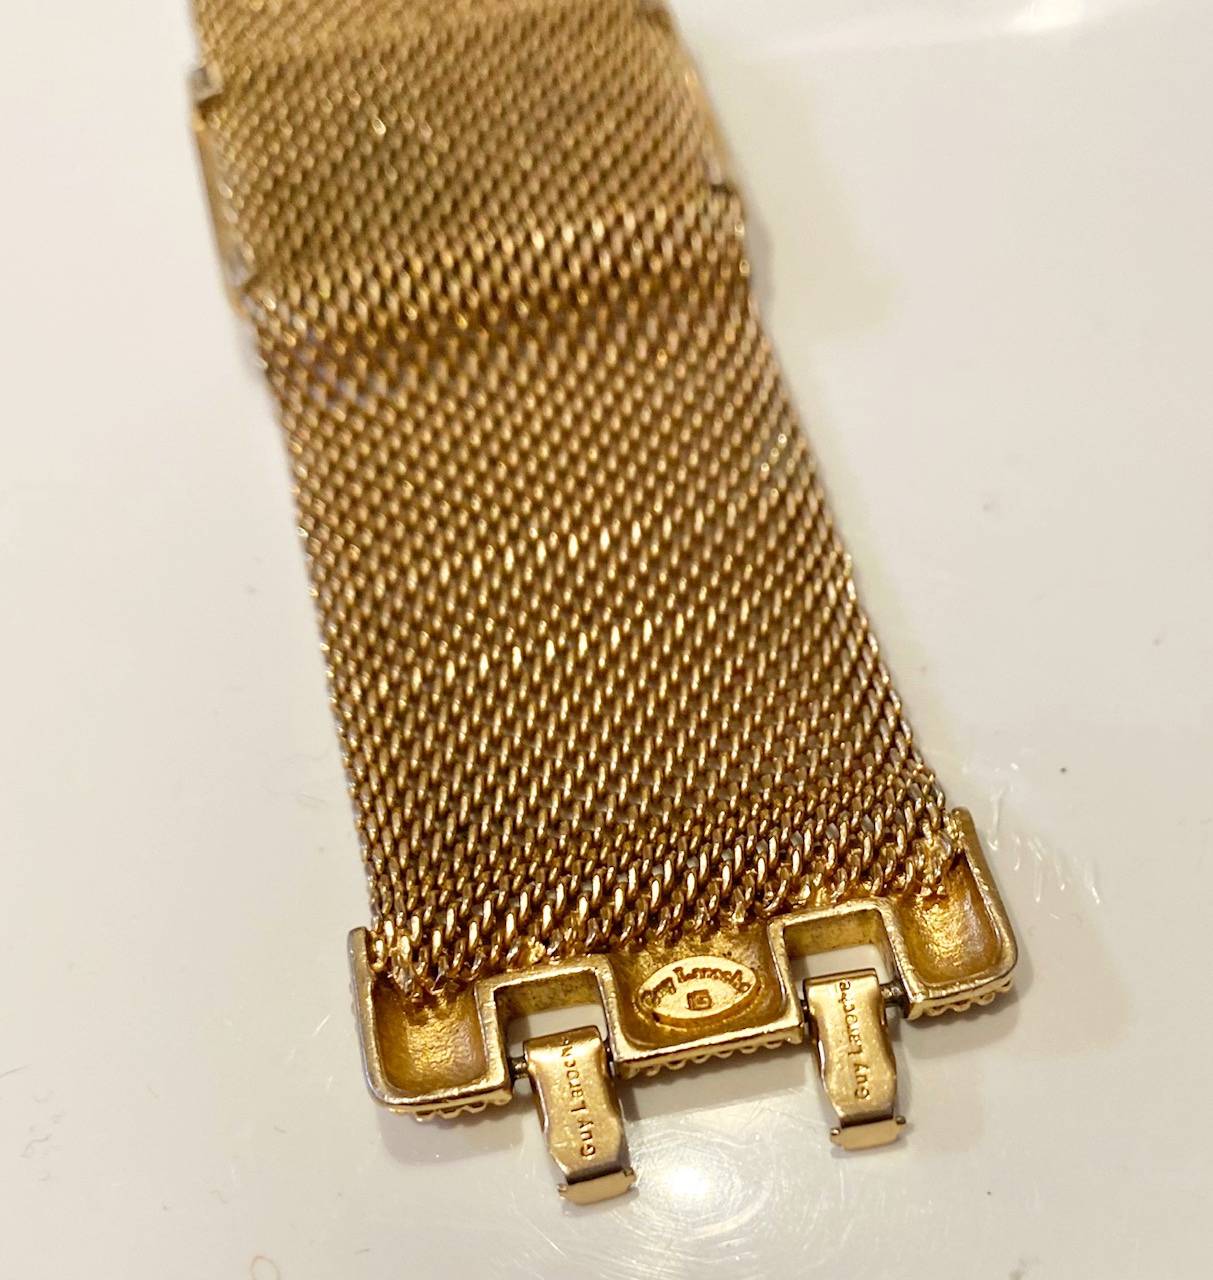 1980s Guy Laroche Gold Plated Mesh Crystal Bangle - style - CHNGR